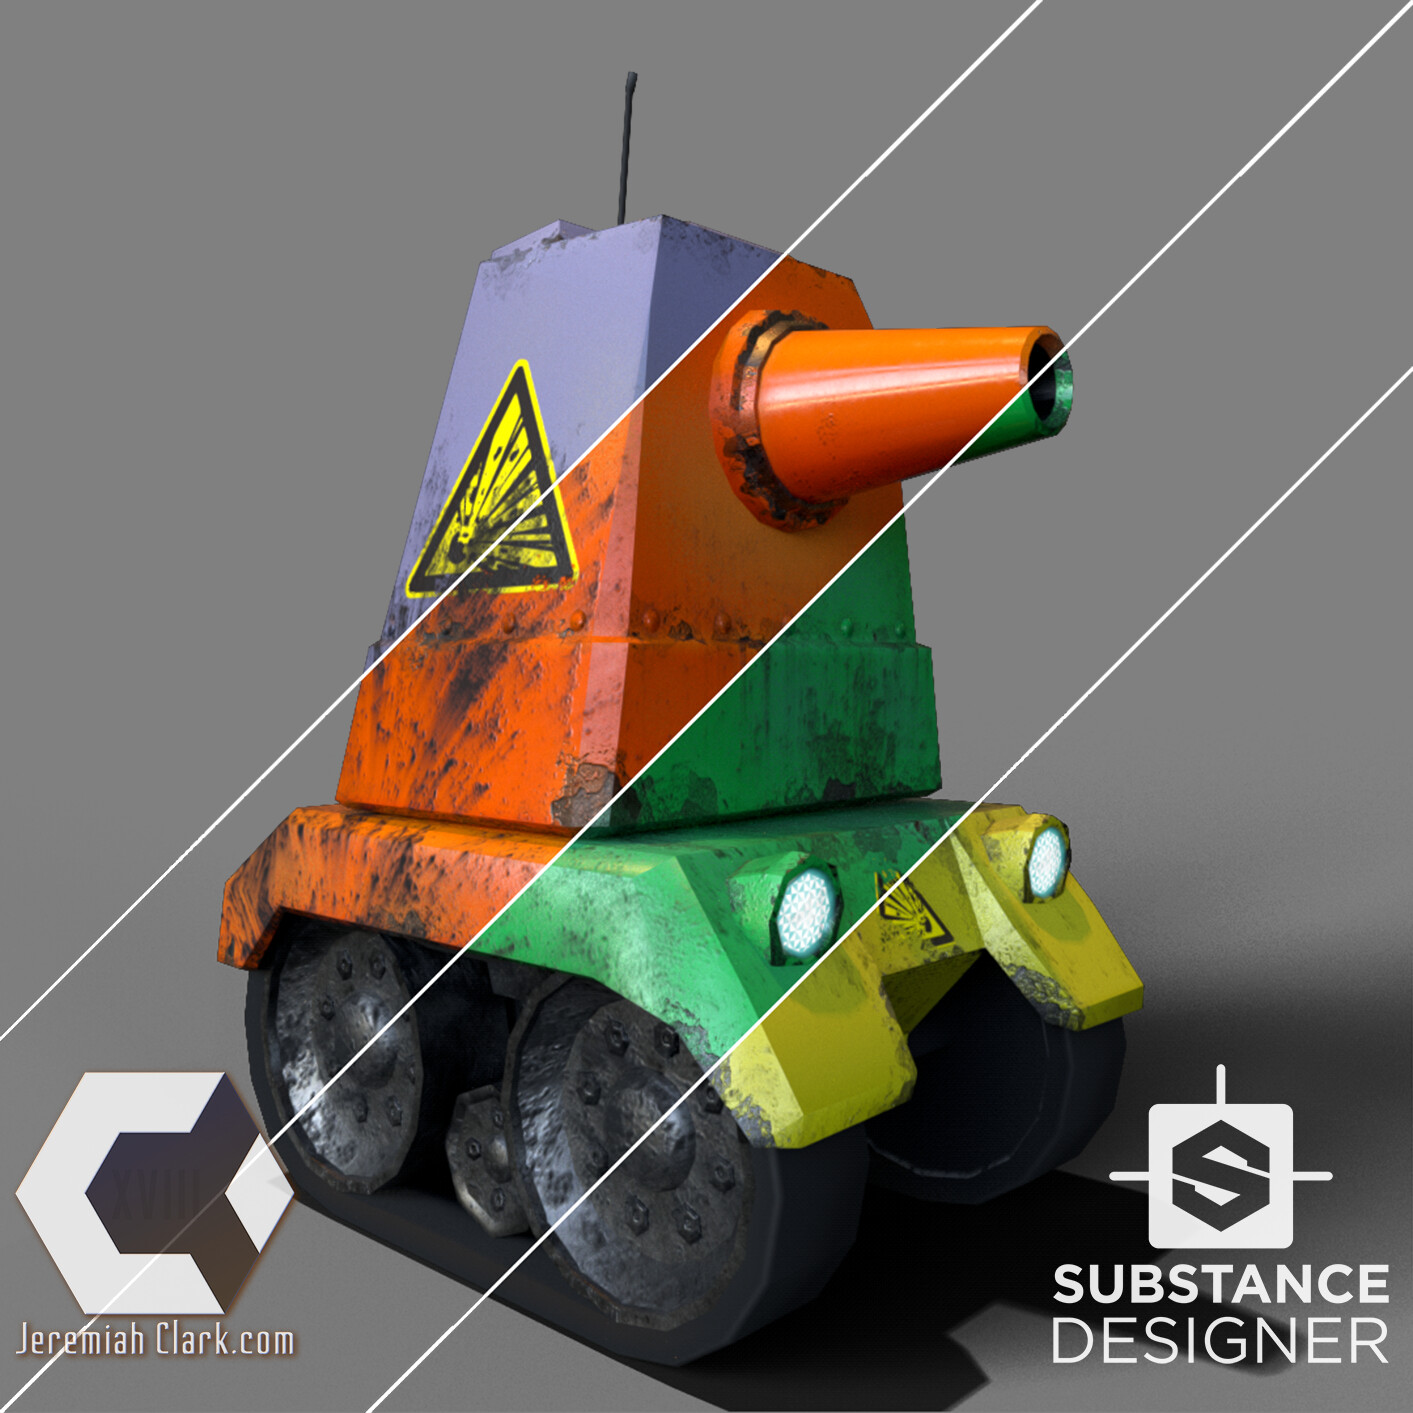 The substance also has built-in paint color options that can be customized.

Mesh optimized and UVed in Modo.
Textured using Substance Designer.
Rendered using IRay in Substance Designer.